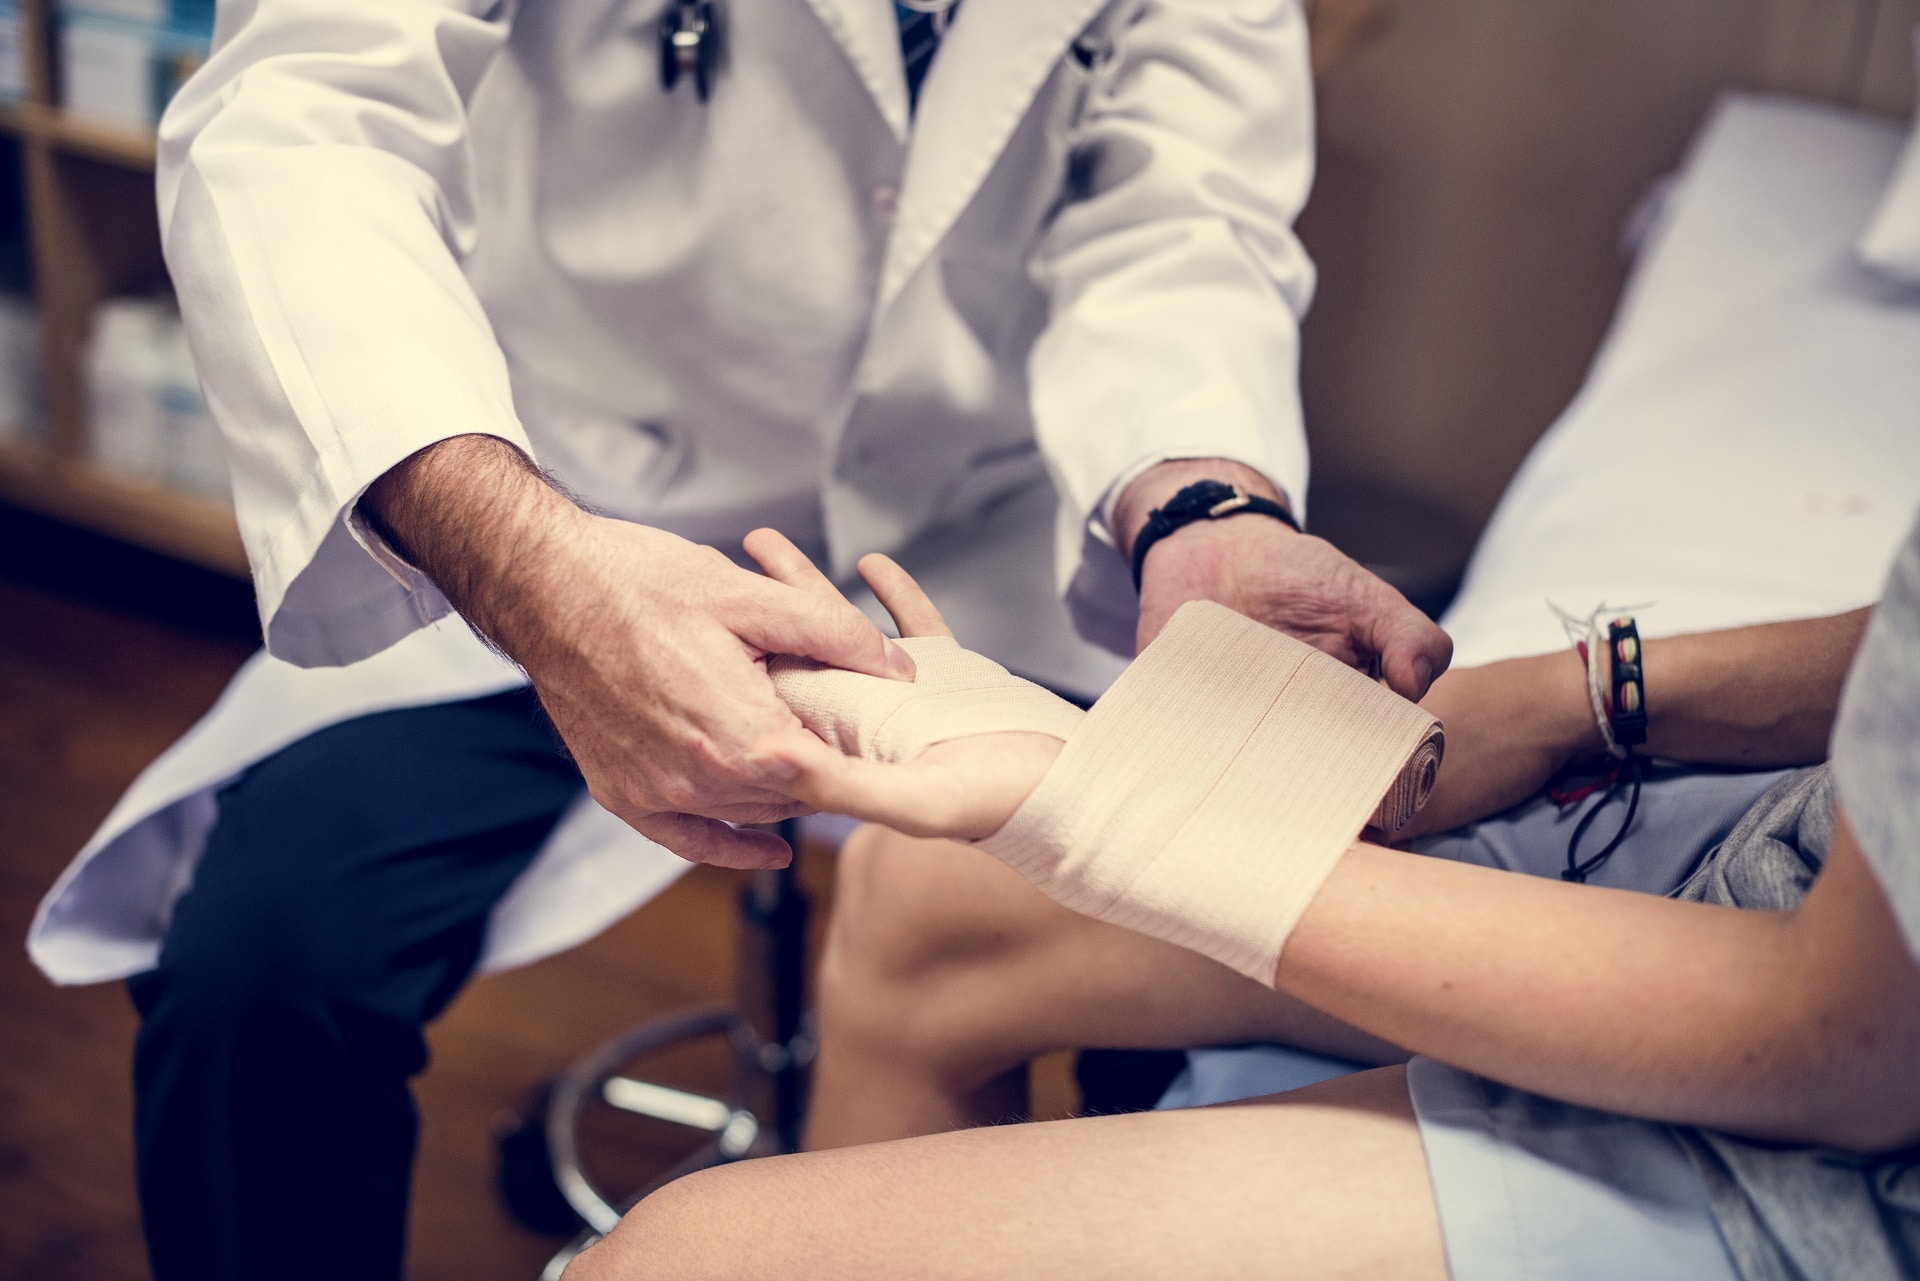 Doctor treats a worker's hand injury | workplace accidents lawyer | Gash & Associates, P.C.